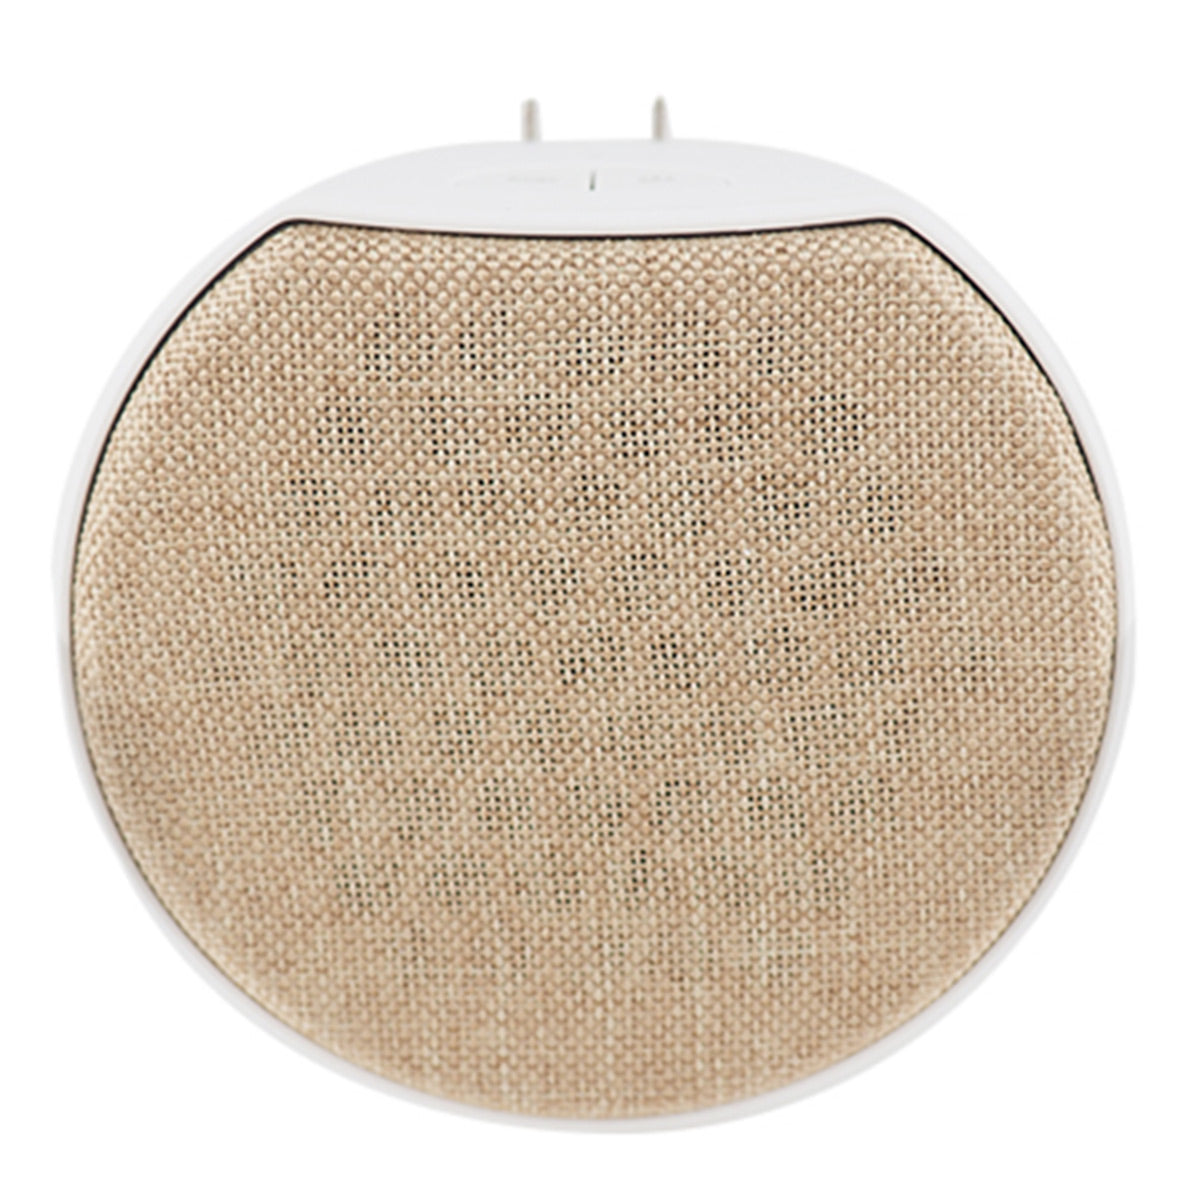 OC Acoustic Newport Plug-in Outlet Speaker with Bluetooth 5.1 and Built-in USB Type-A Charging Port - Set of 6 (Champagne/White and Charcoal/Black)